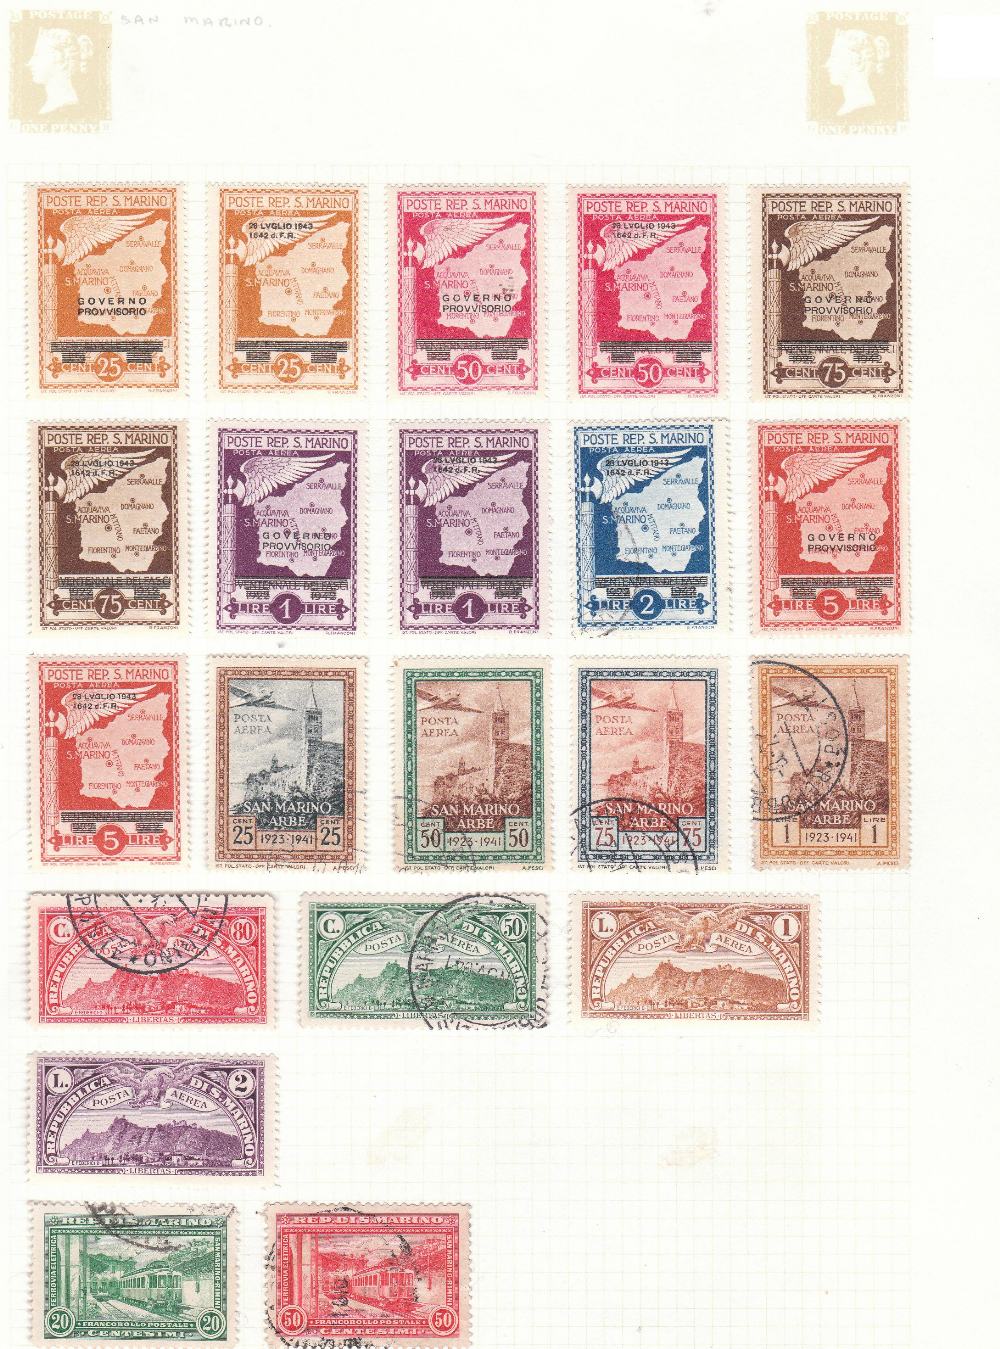 San Marino 1943-1945 Mostly mint range including Postage Due pairs (33).